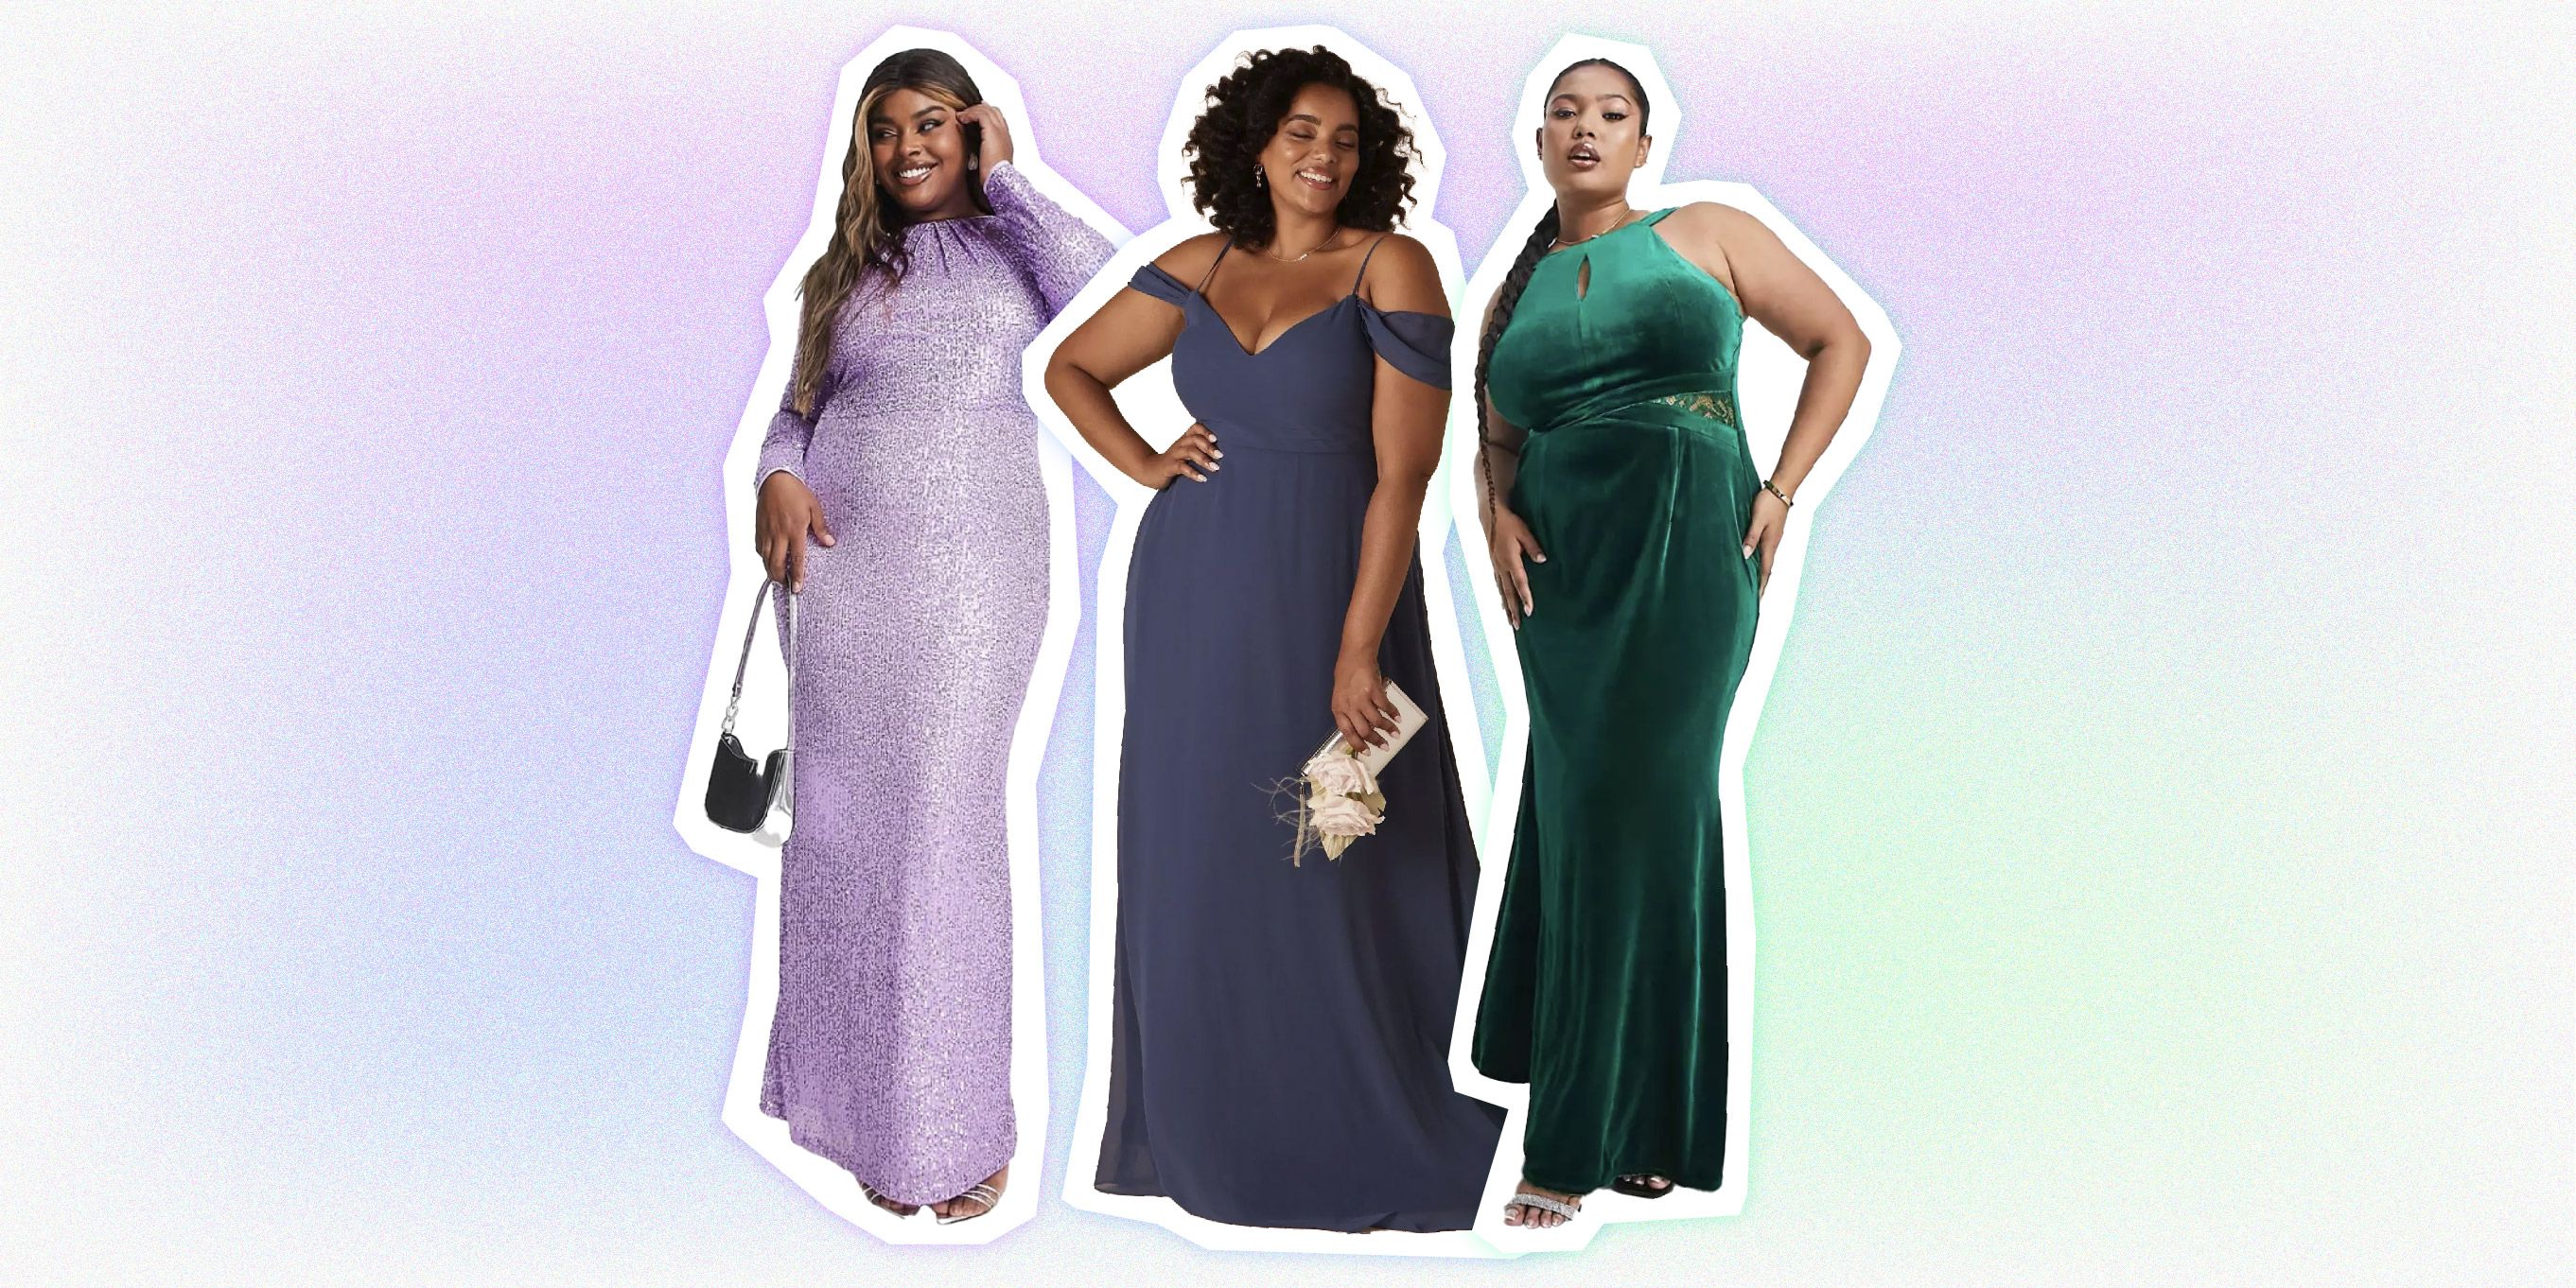 Finding a Wedding Dress for Your Body Type to Promote Body Positivity   Love Maggie